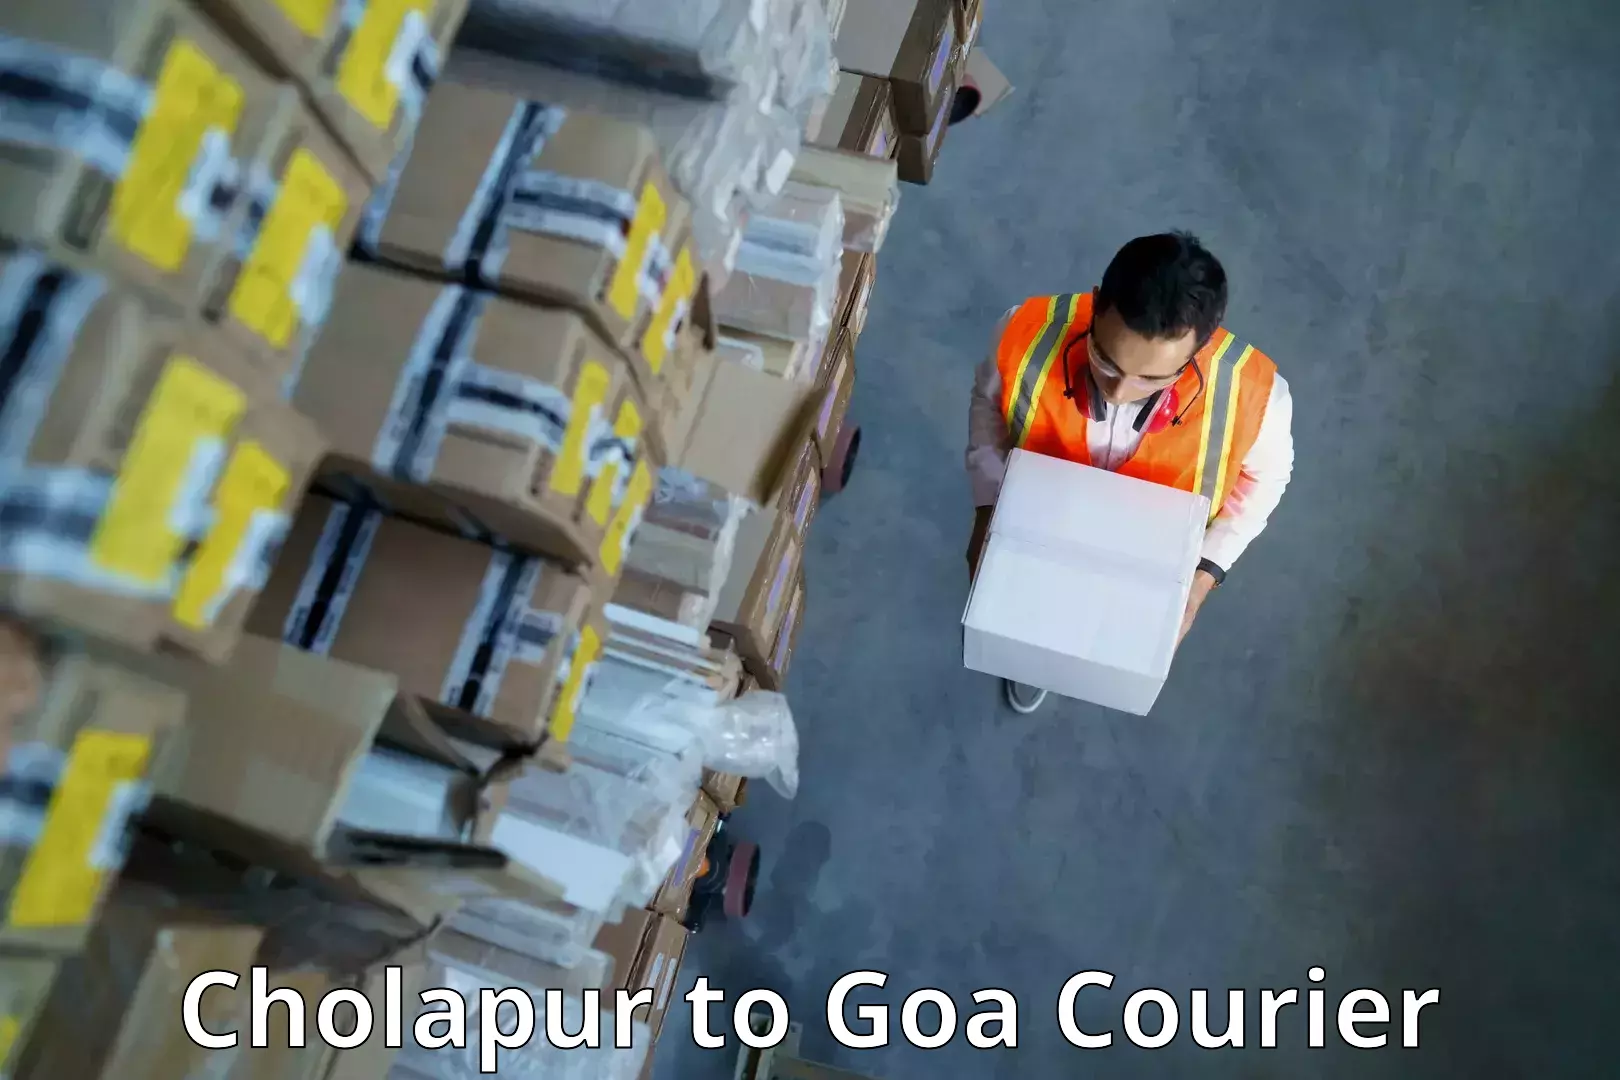 Reliable delivery network Cholapur to South Goa